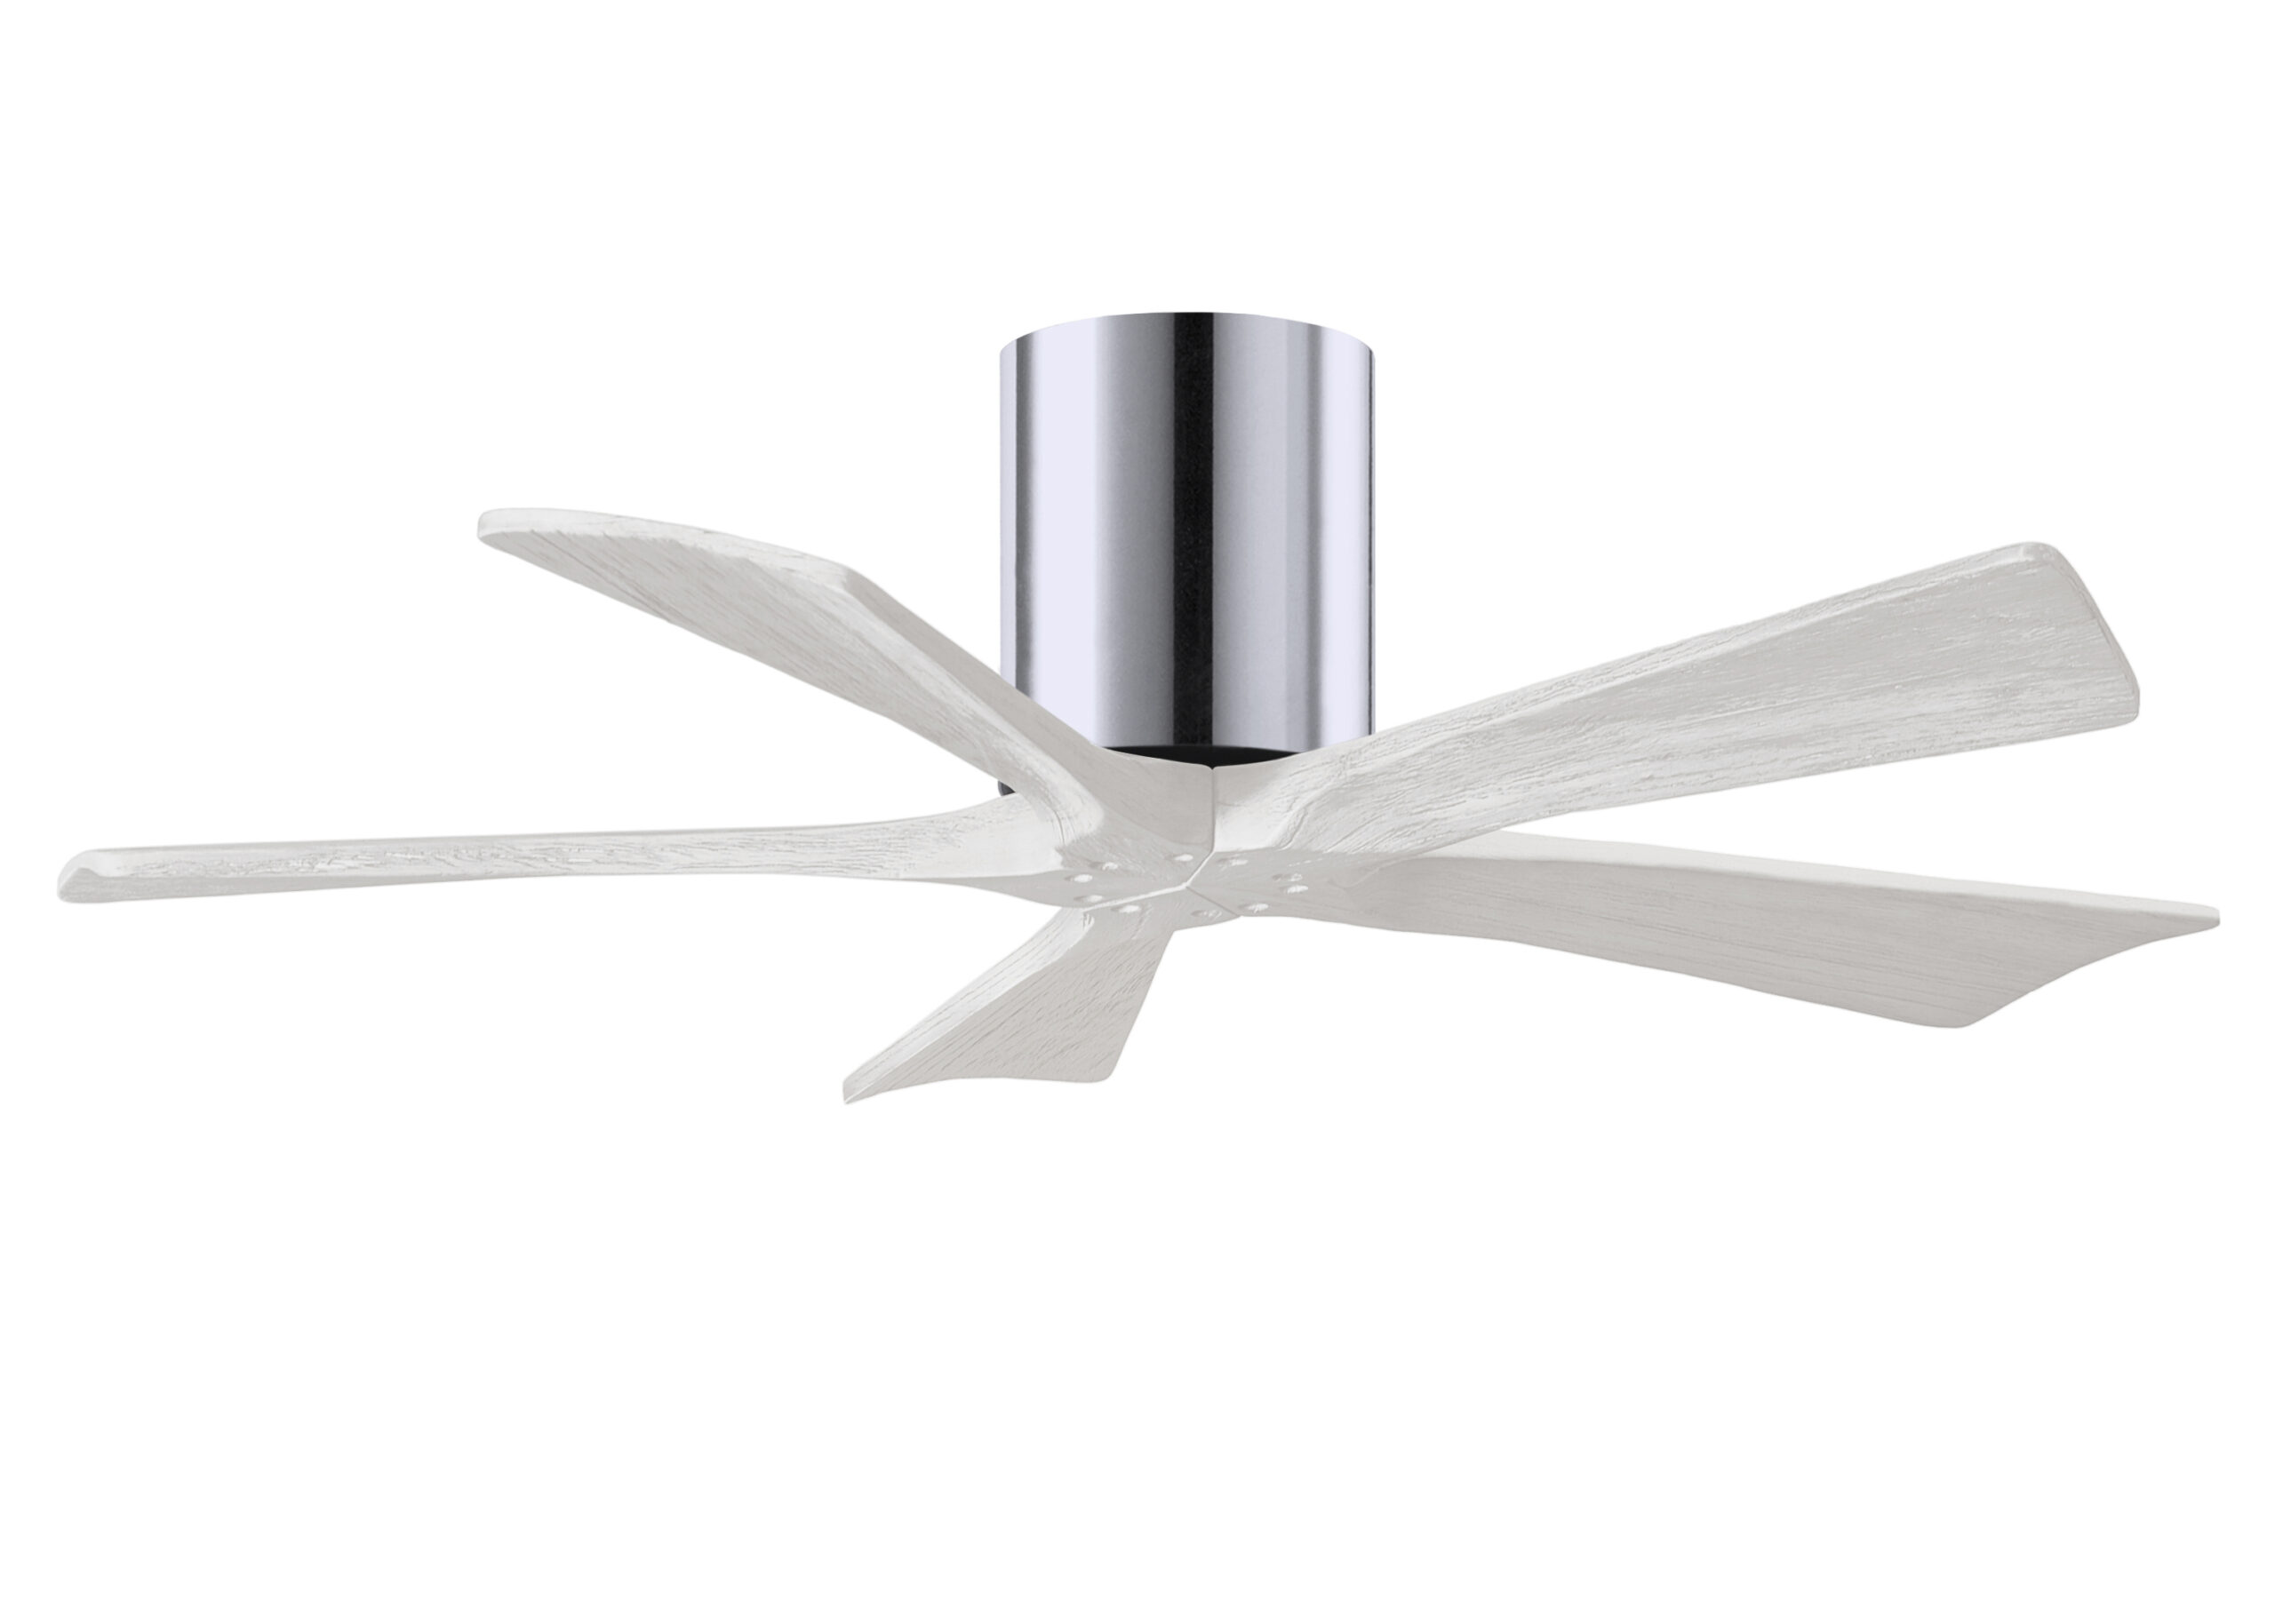 Irene-5H Ceiling Fan in Polished Chrome Finish with 42